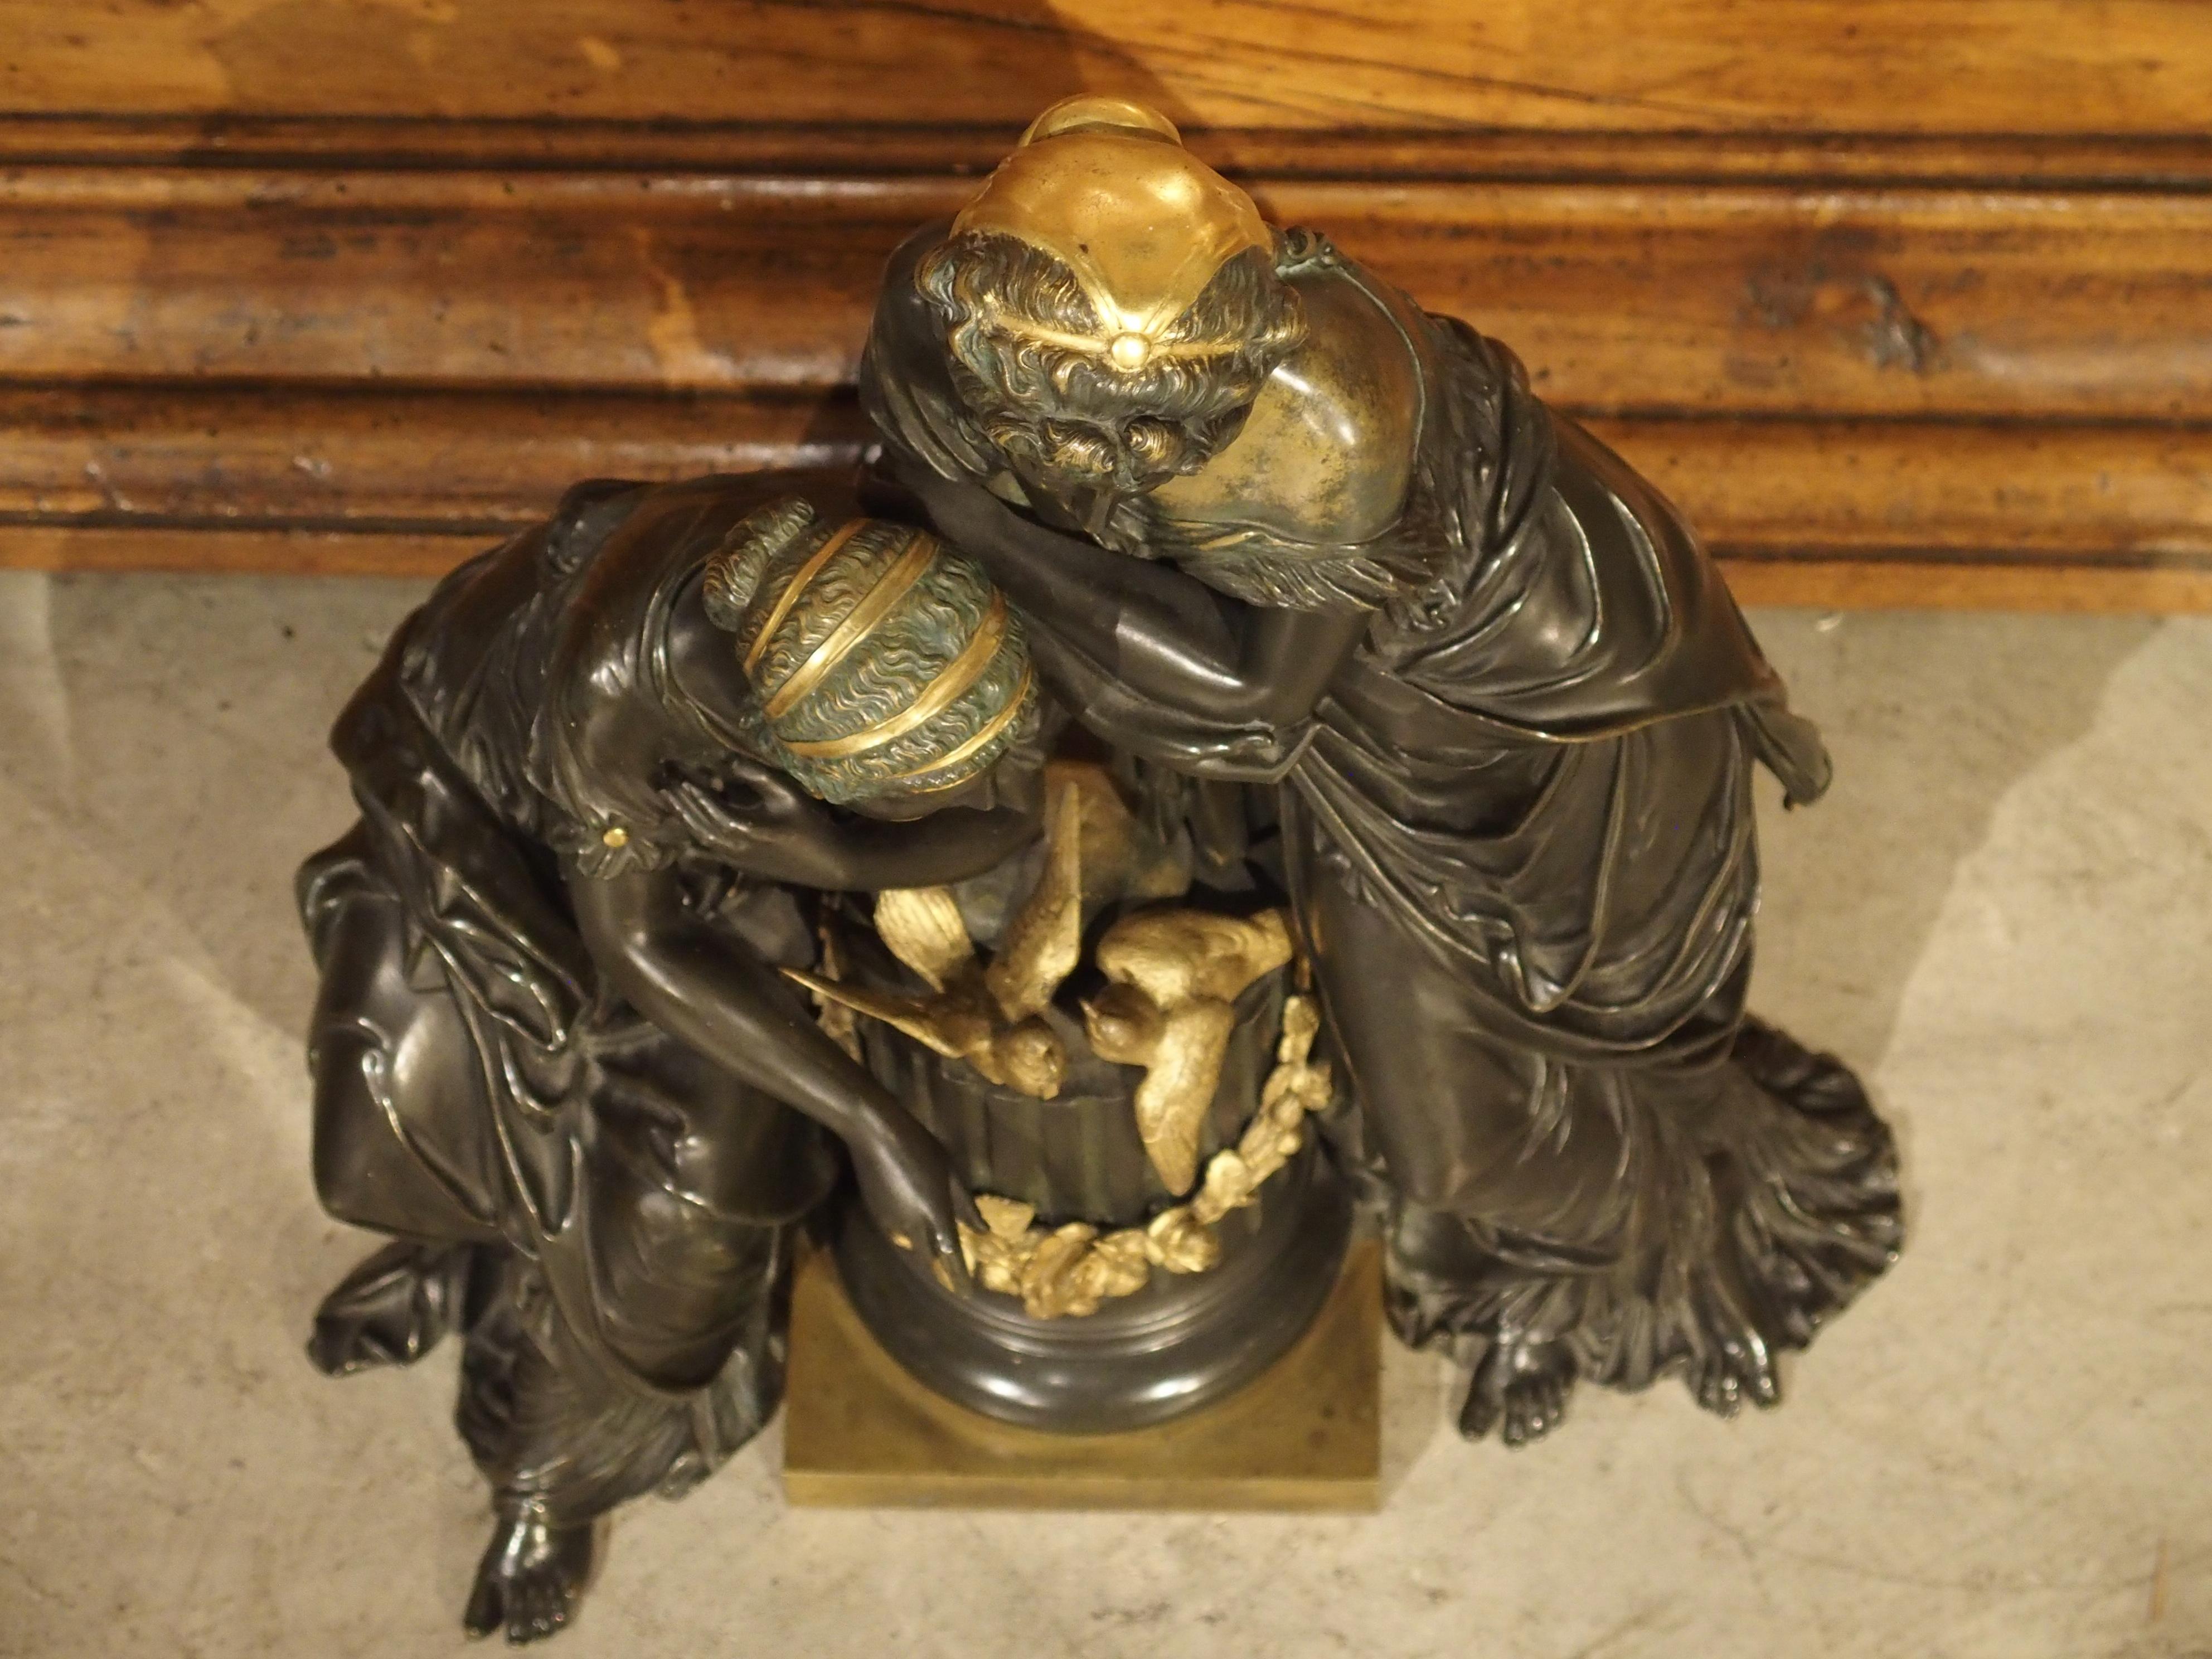 This striking black patinated bronze sculpture is offset with a few small bright sections of gold. The Classical subject matter features two maidens resting and gazing upon a fluted half column with two gold birds. It exhibits fine details and